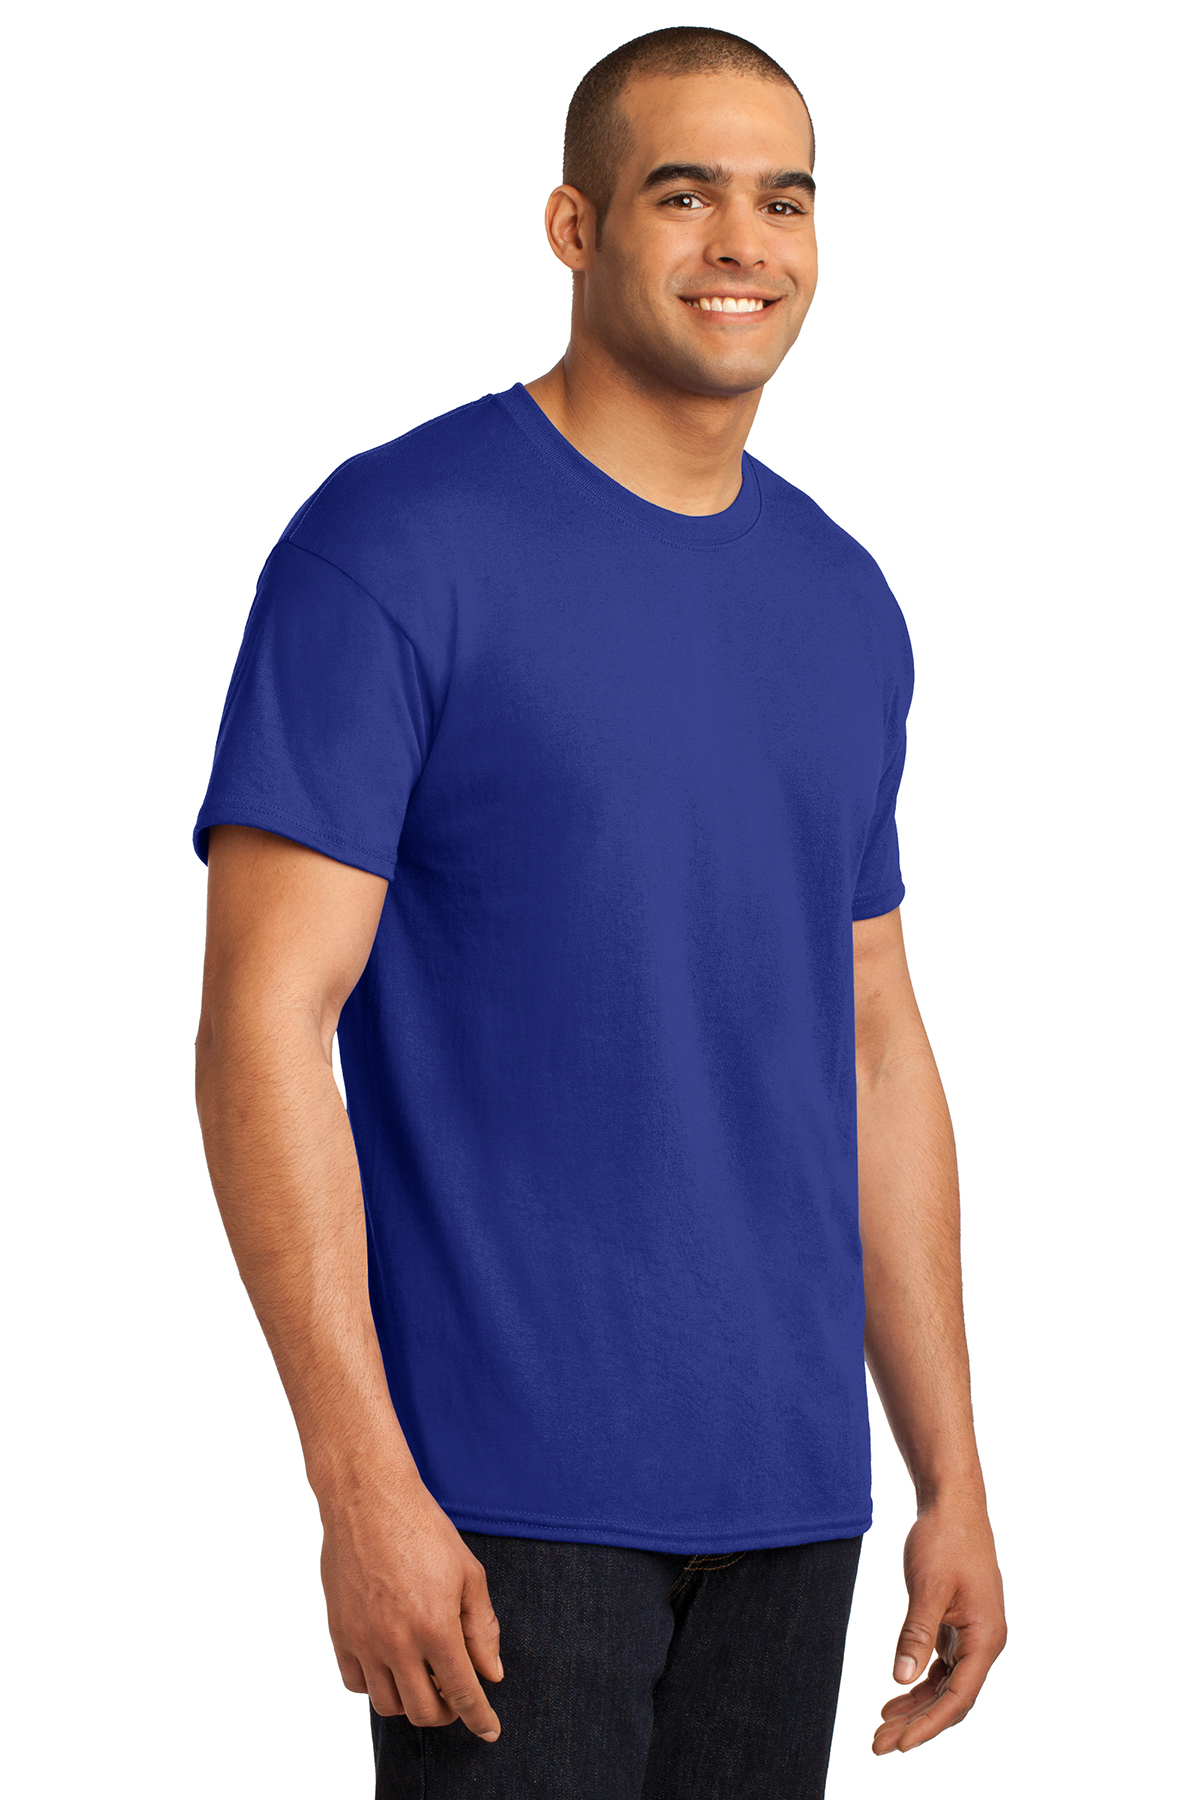 Hanes - EcoSmart 50/50 Cotton/Poly T-Shirt | Product | Company Casuals